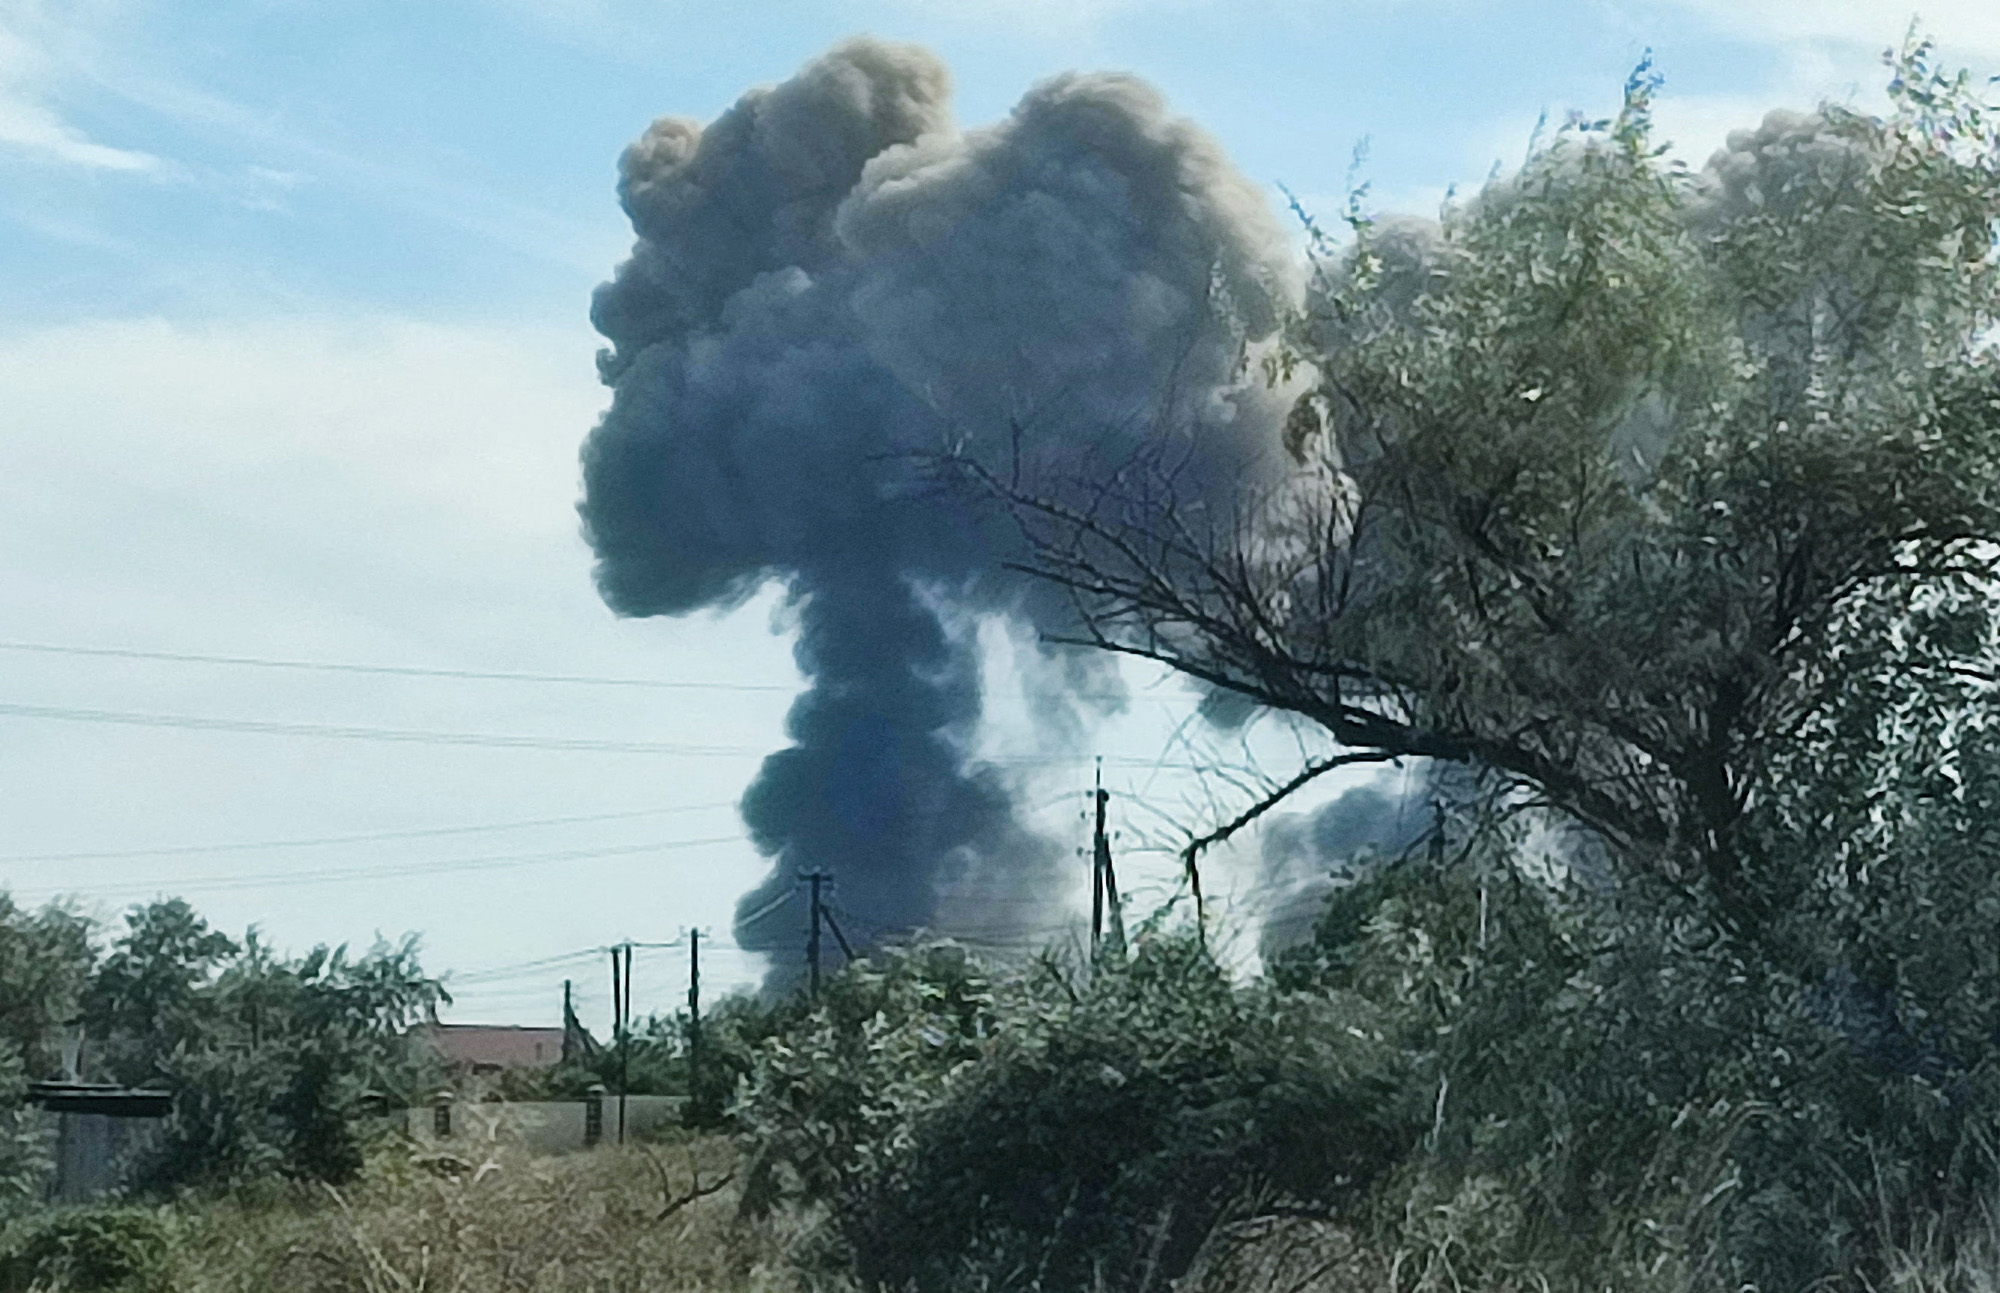 Smoke rises after explosions were heard from the direction of a Russian military airbase near Novofedorivka, Crimea on August 9.